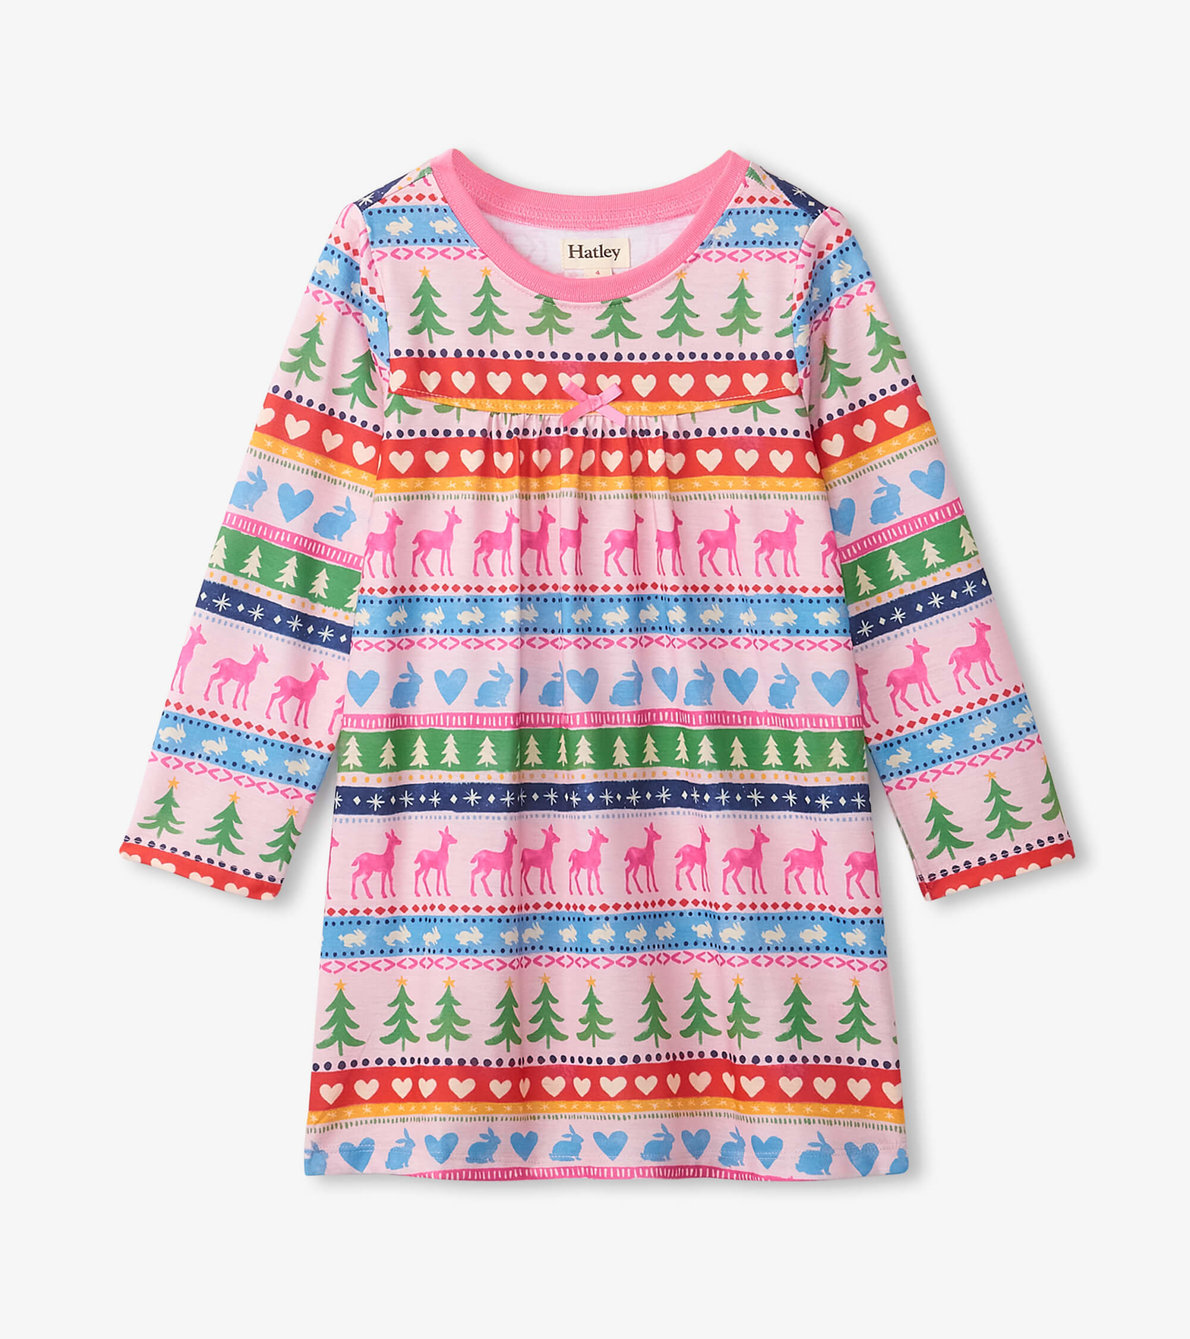 View larger image of Pink Painted Fairisle Long Sleeve Girls Nightgown